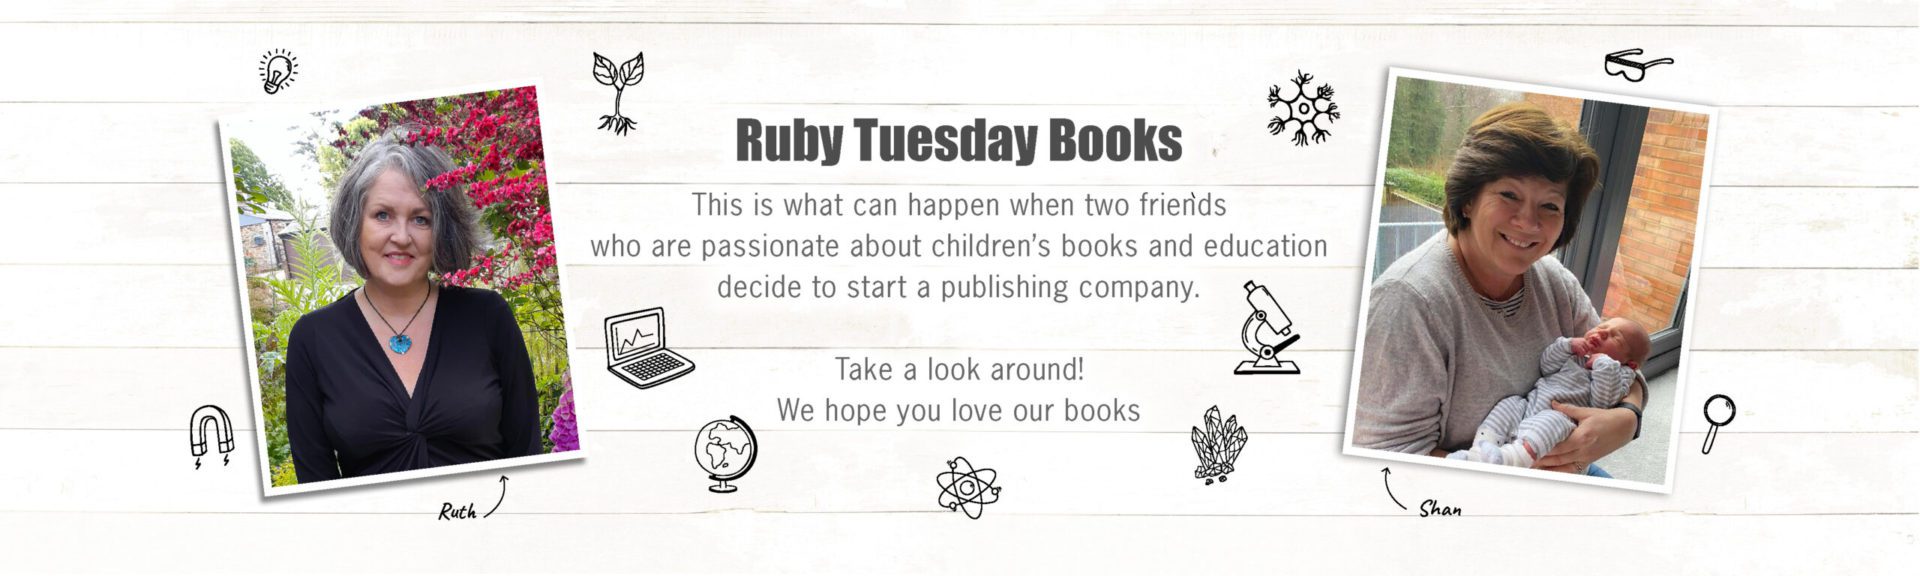 Ruby Tuesday Books' owners - Shan & Ruth